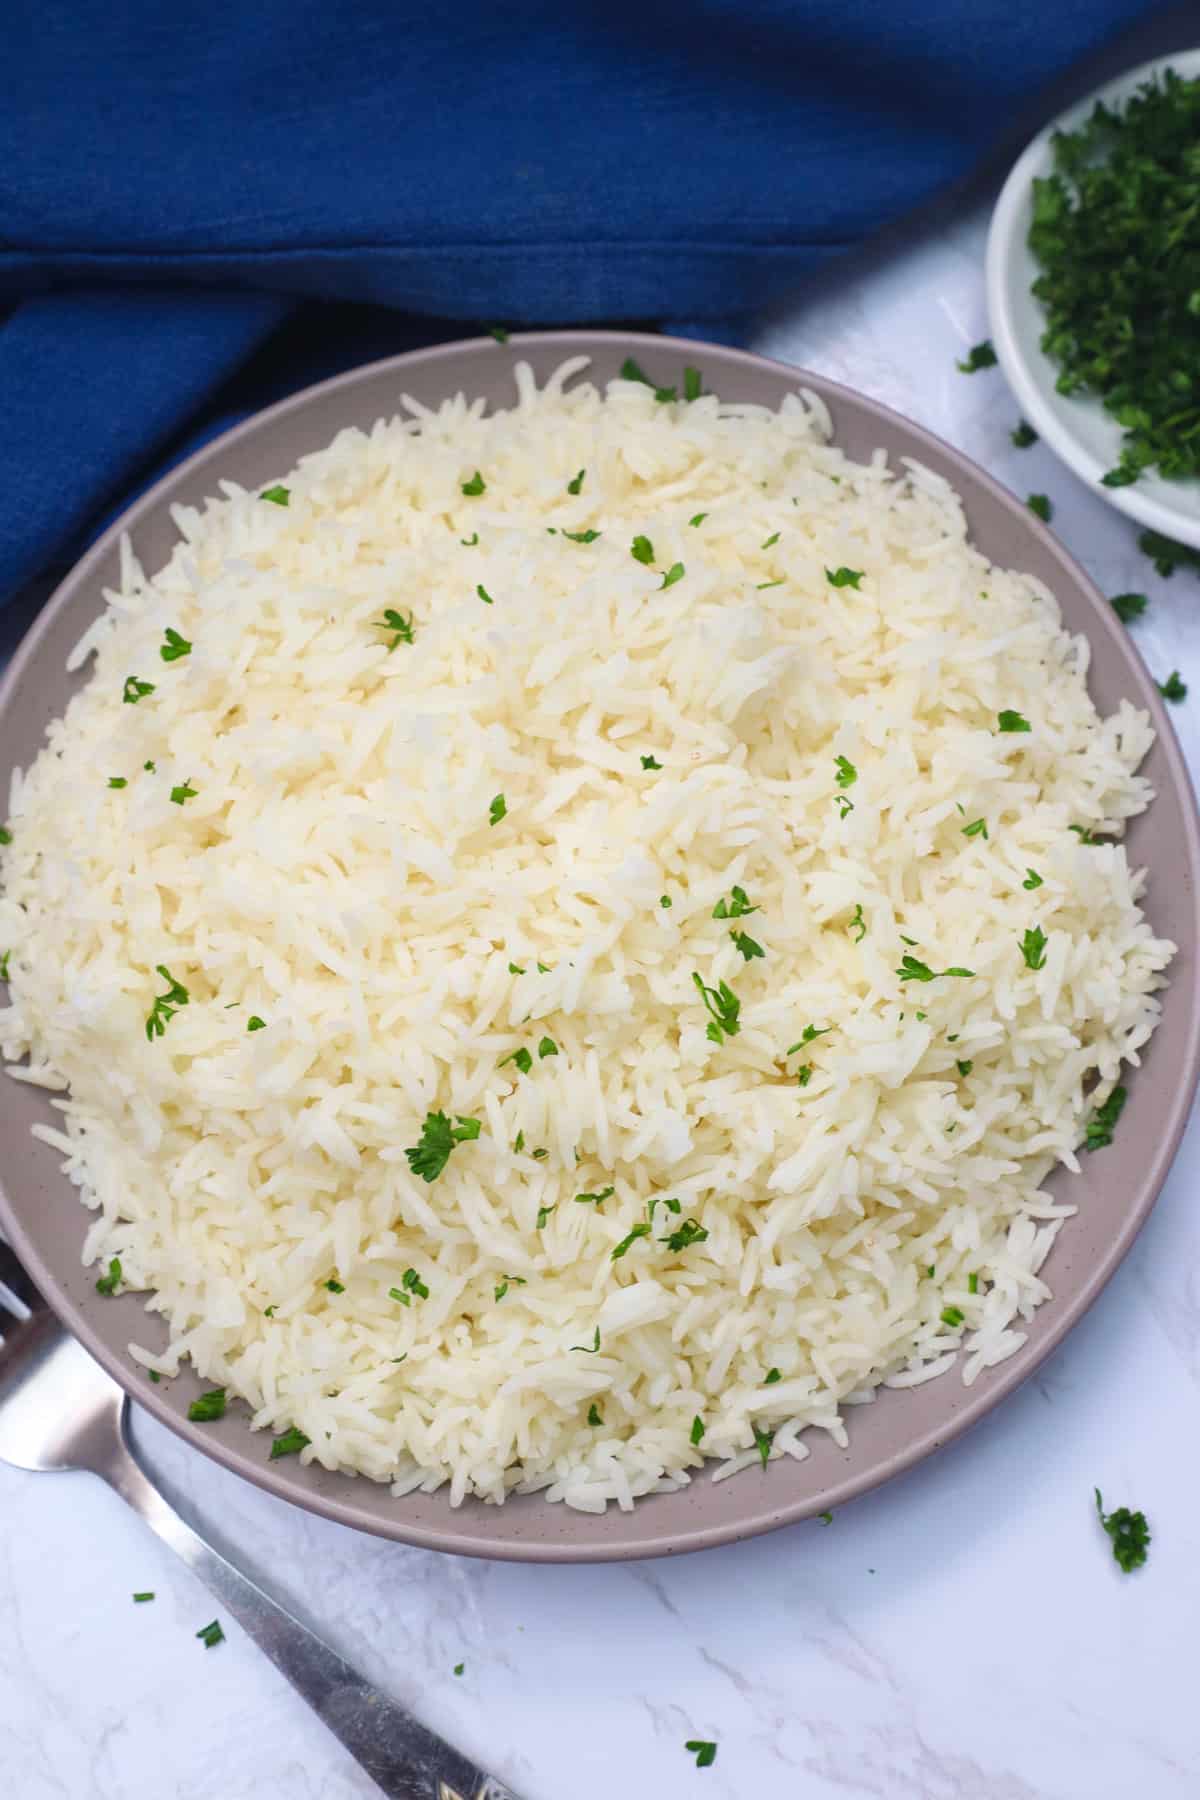 How to make basmati rice is the perfect skill to add